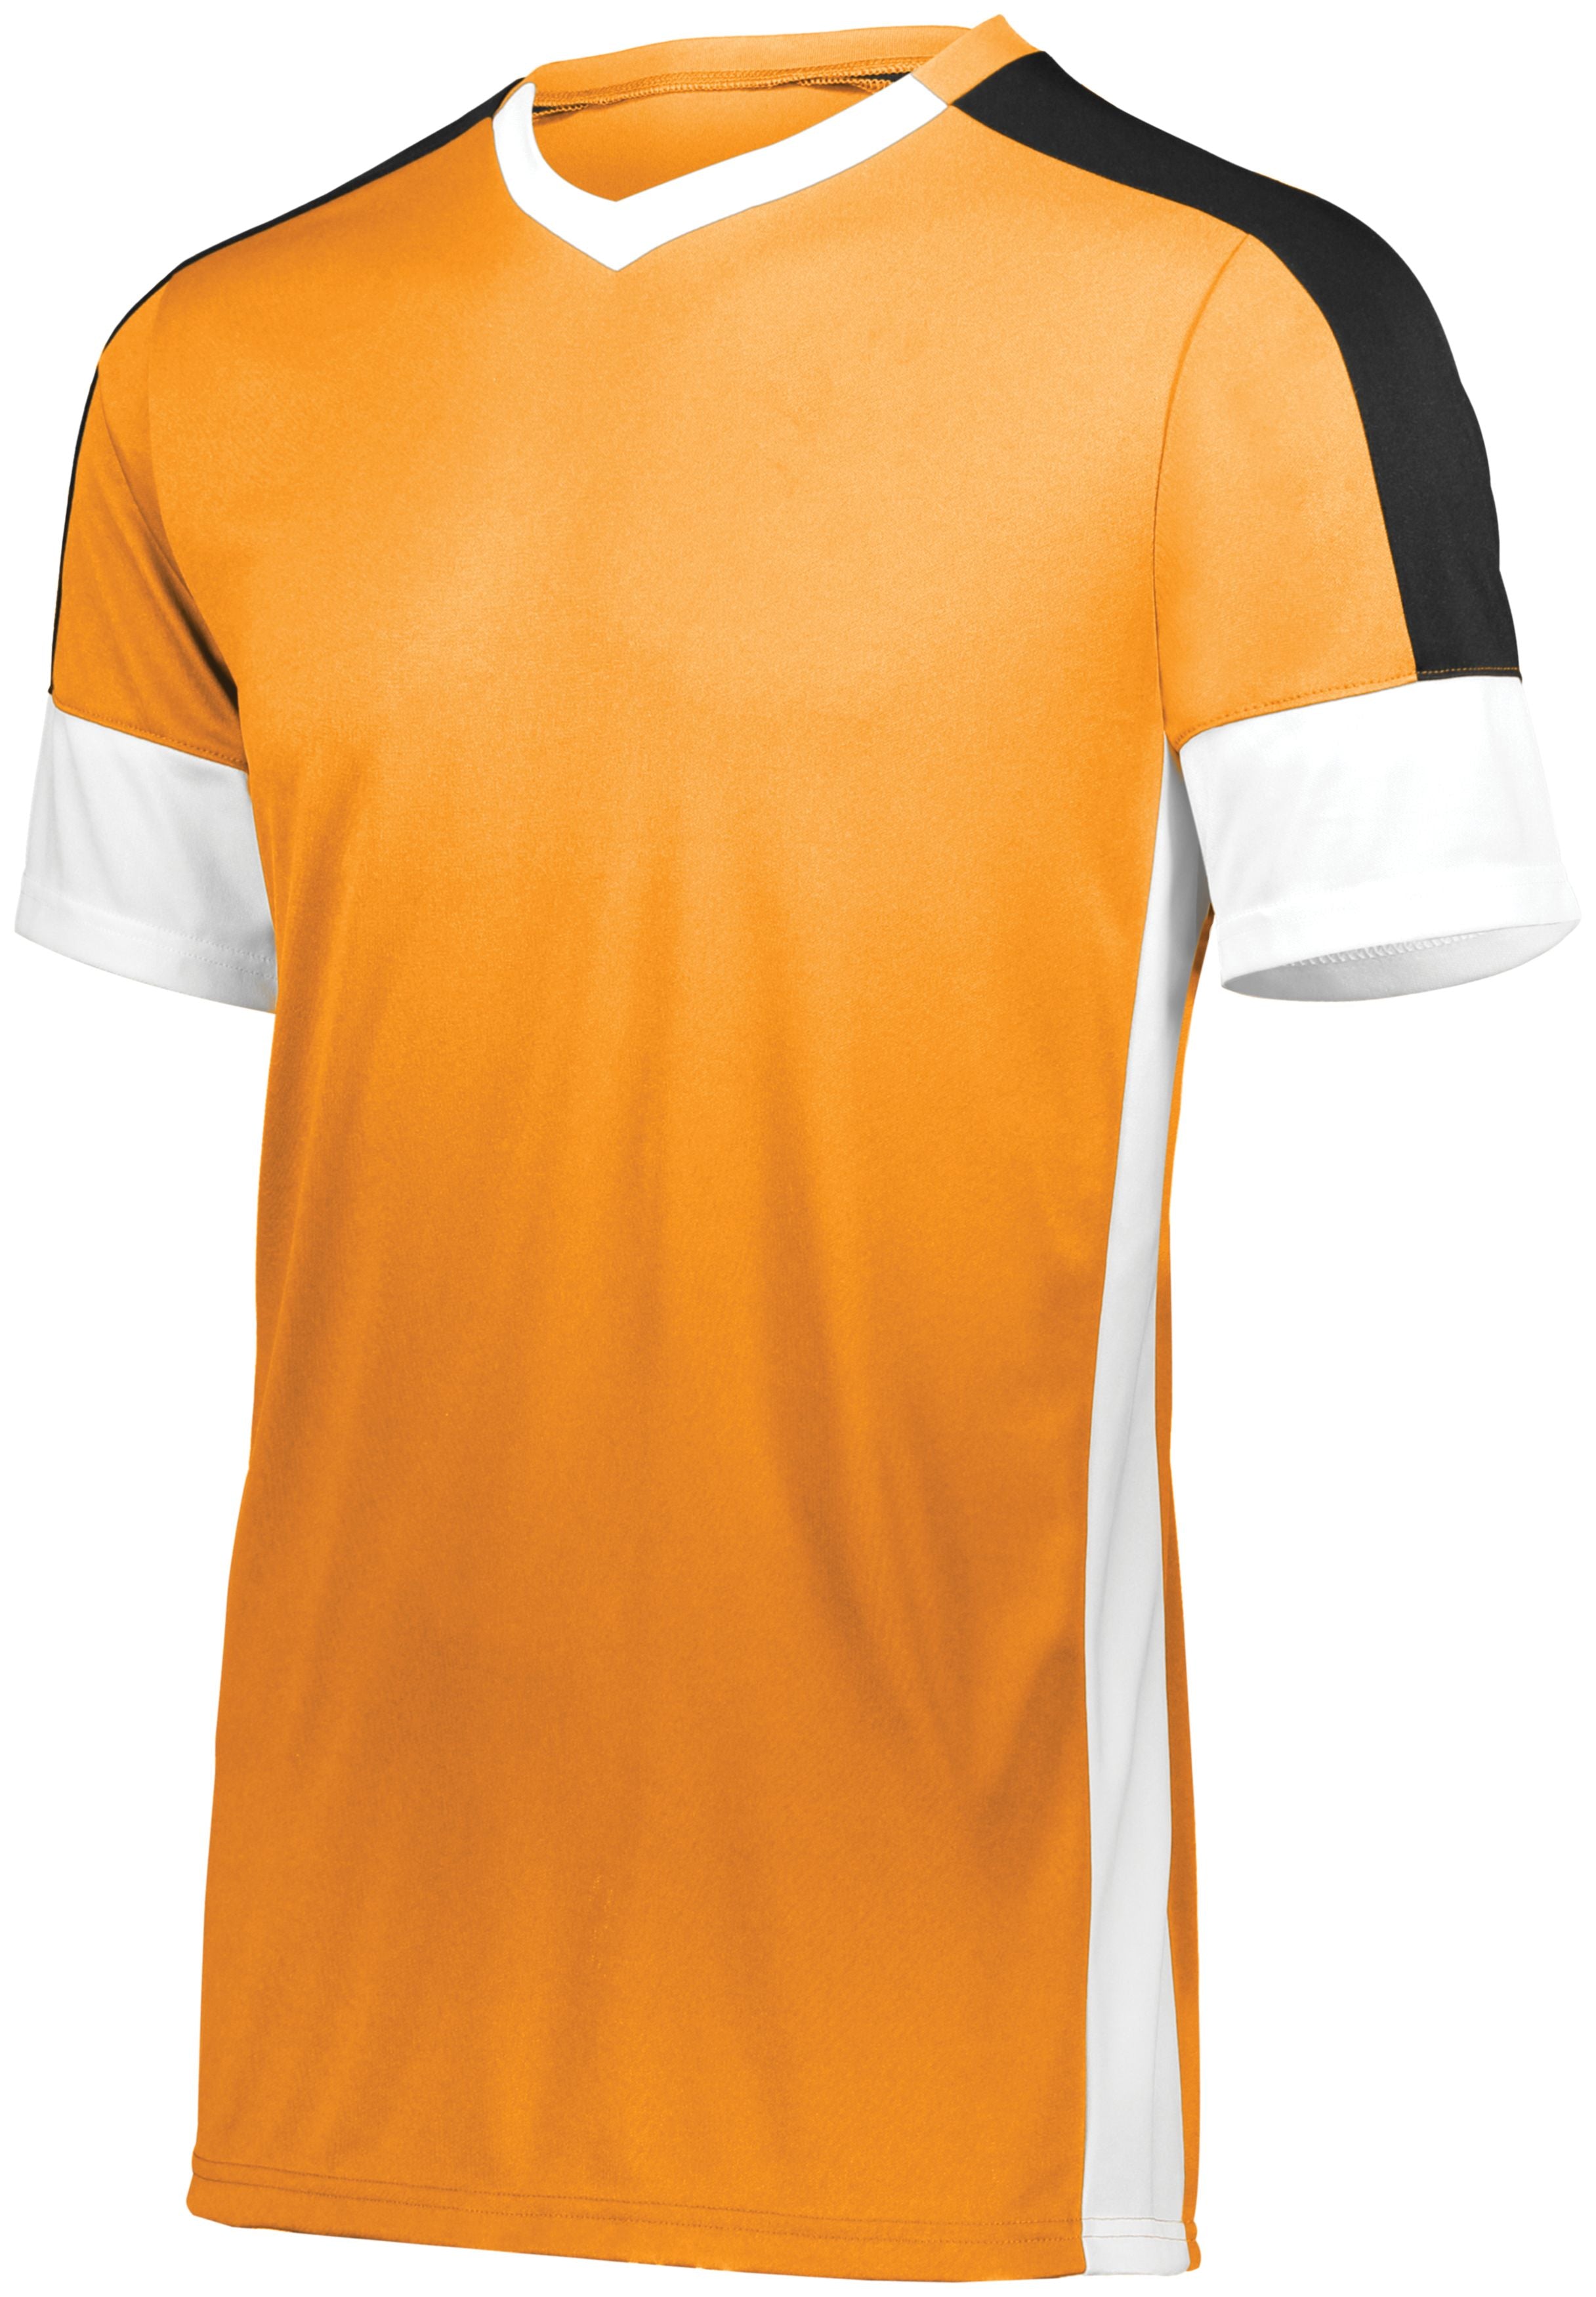 High 5 Youth Wembley Soccer Jersey in Power Orange/White/Black  -Part of the Youth, Youth-Jersey, High5-Products, Soccer, Shirts, All-Sports-1 product lines at KanaleyCreations.com